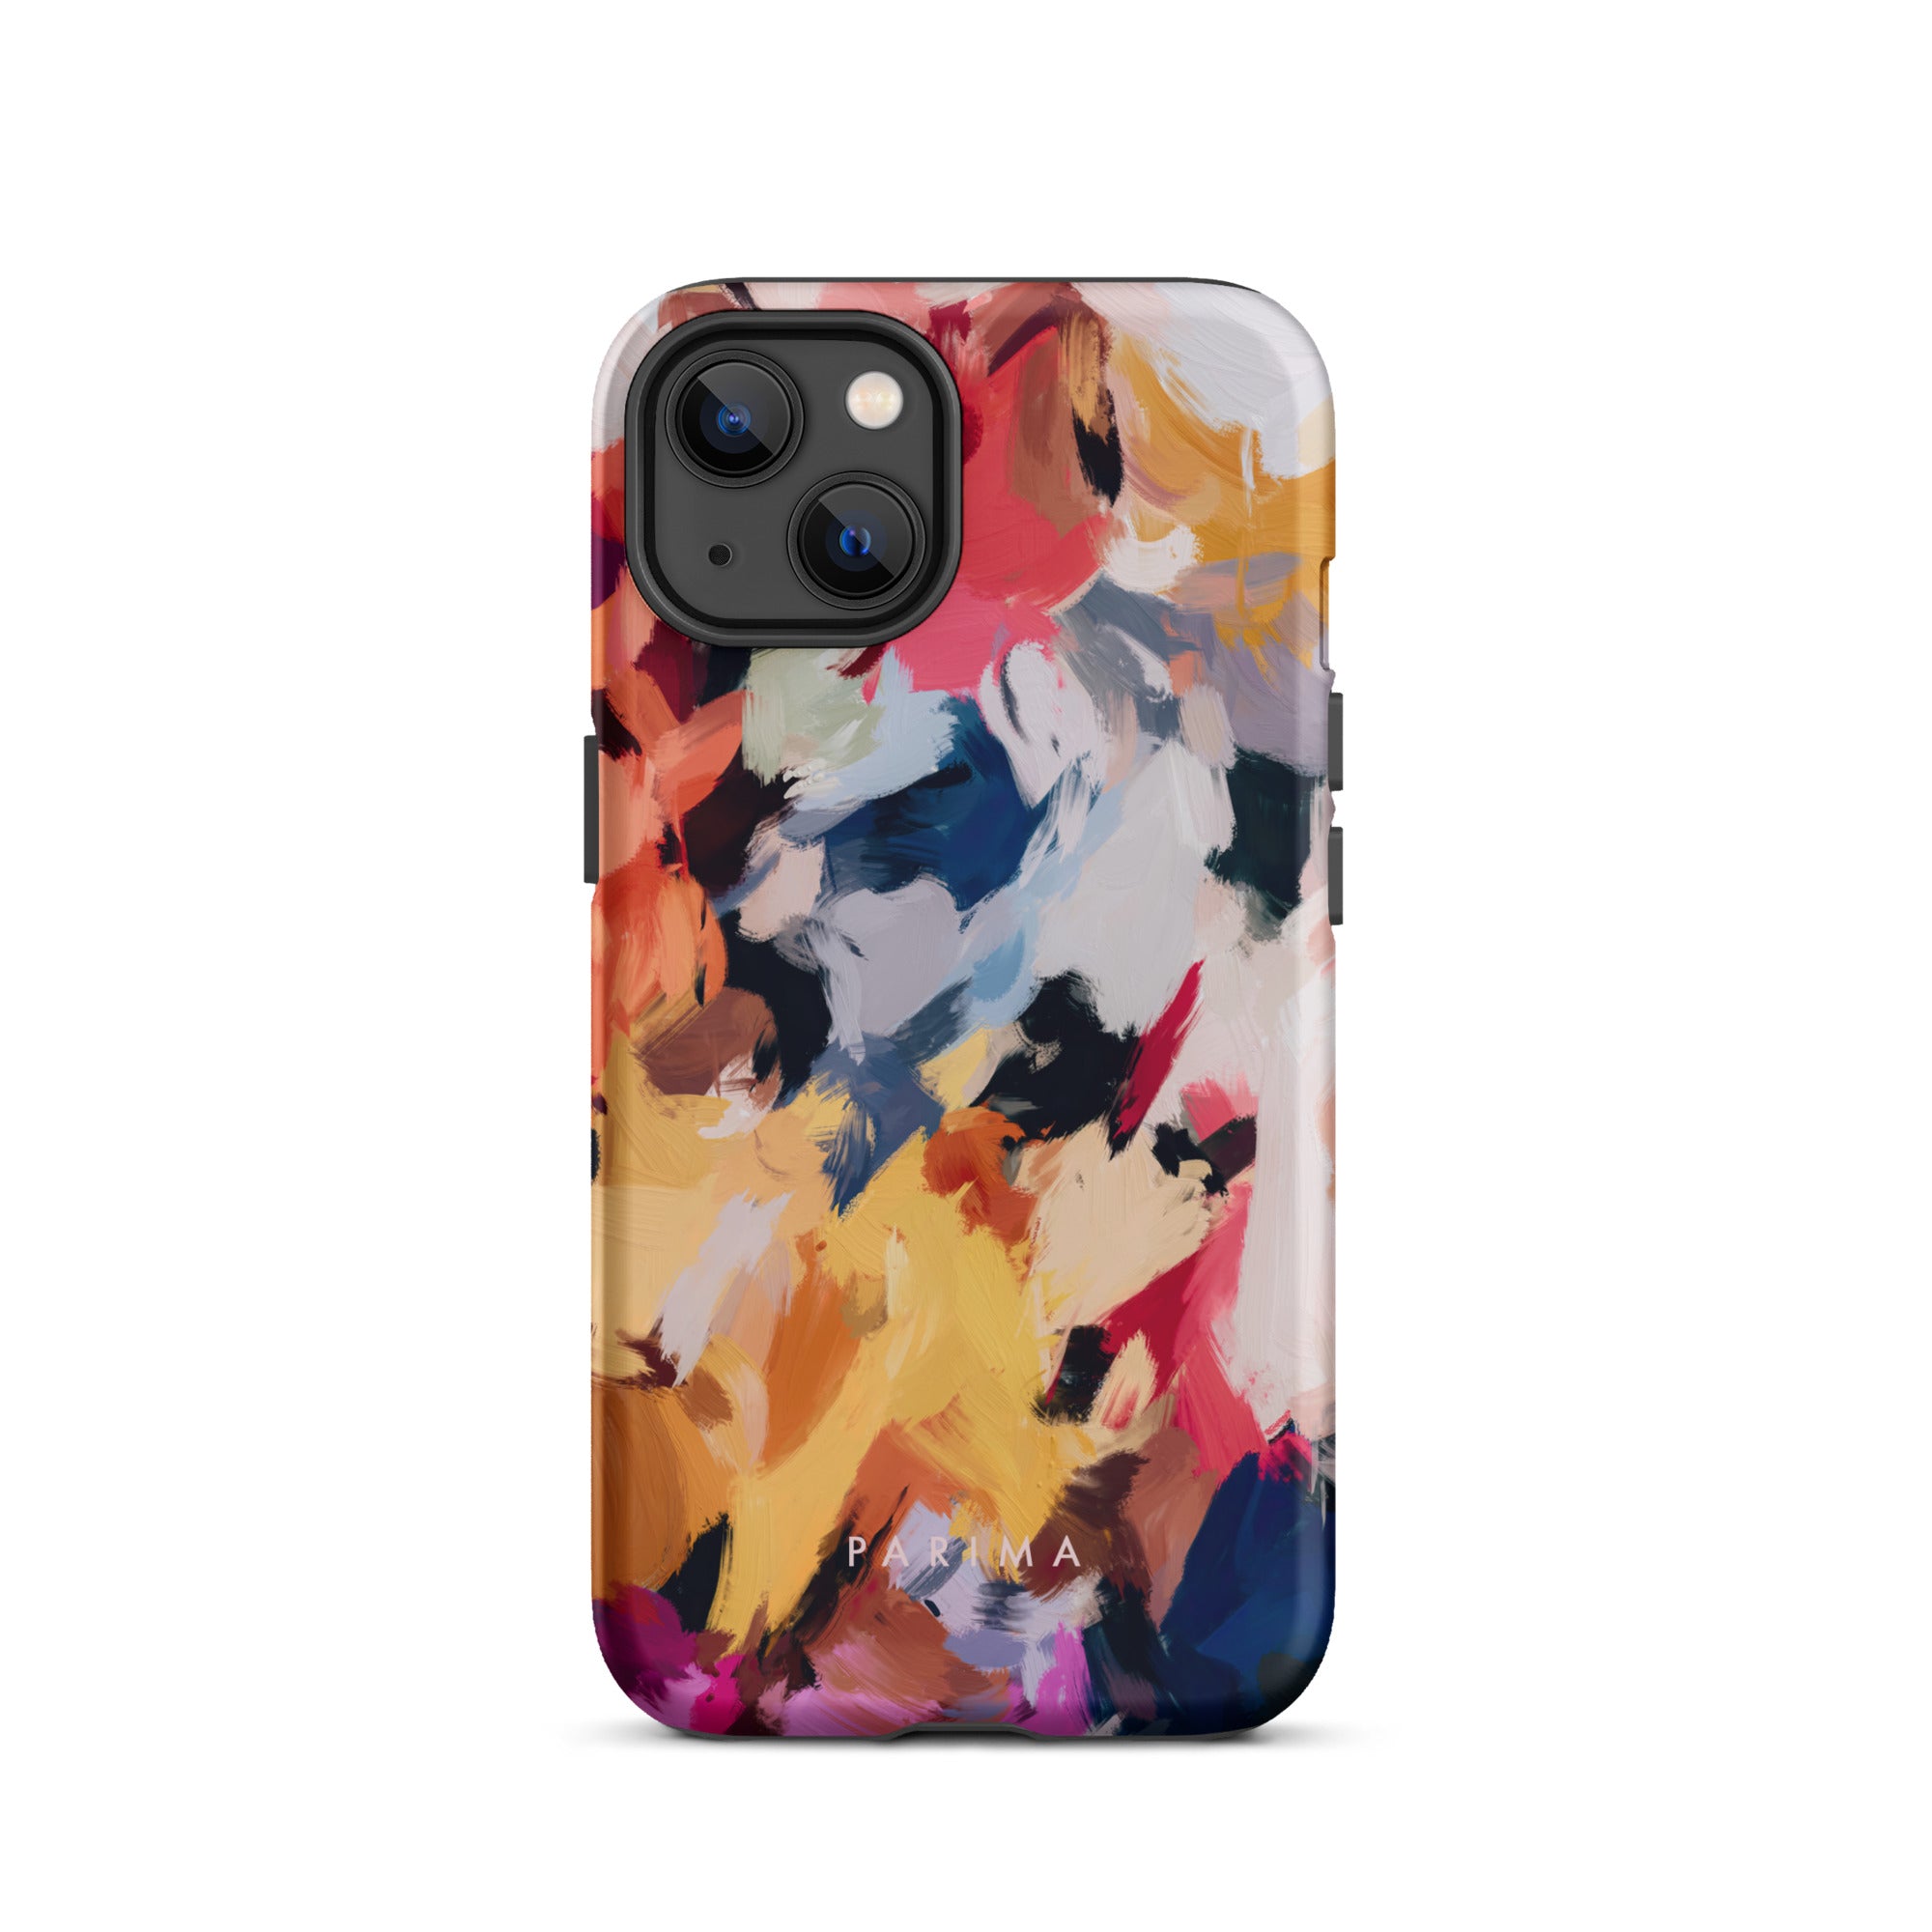 Wilde, blue and yellow abstract art on iPhone 13 tough case by Parima Studio